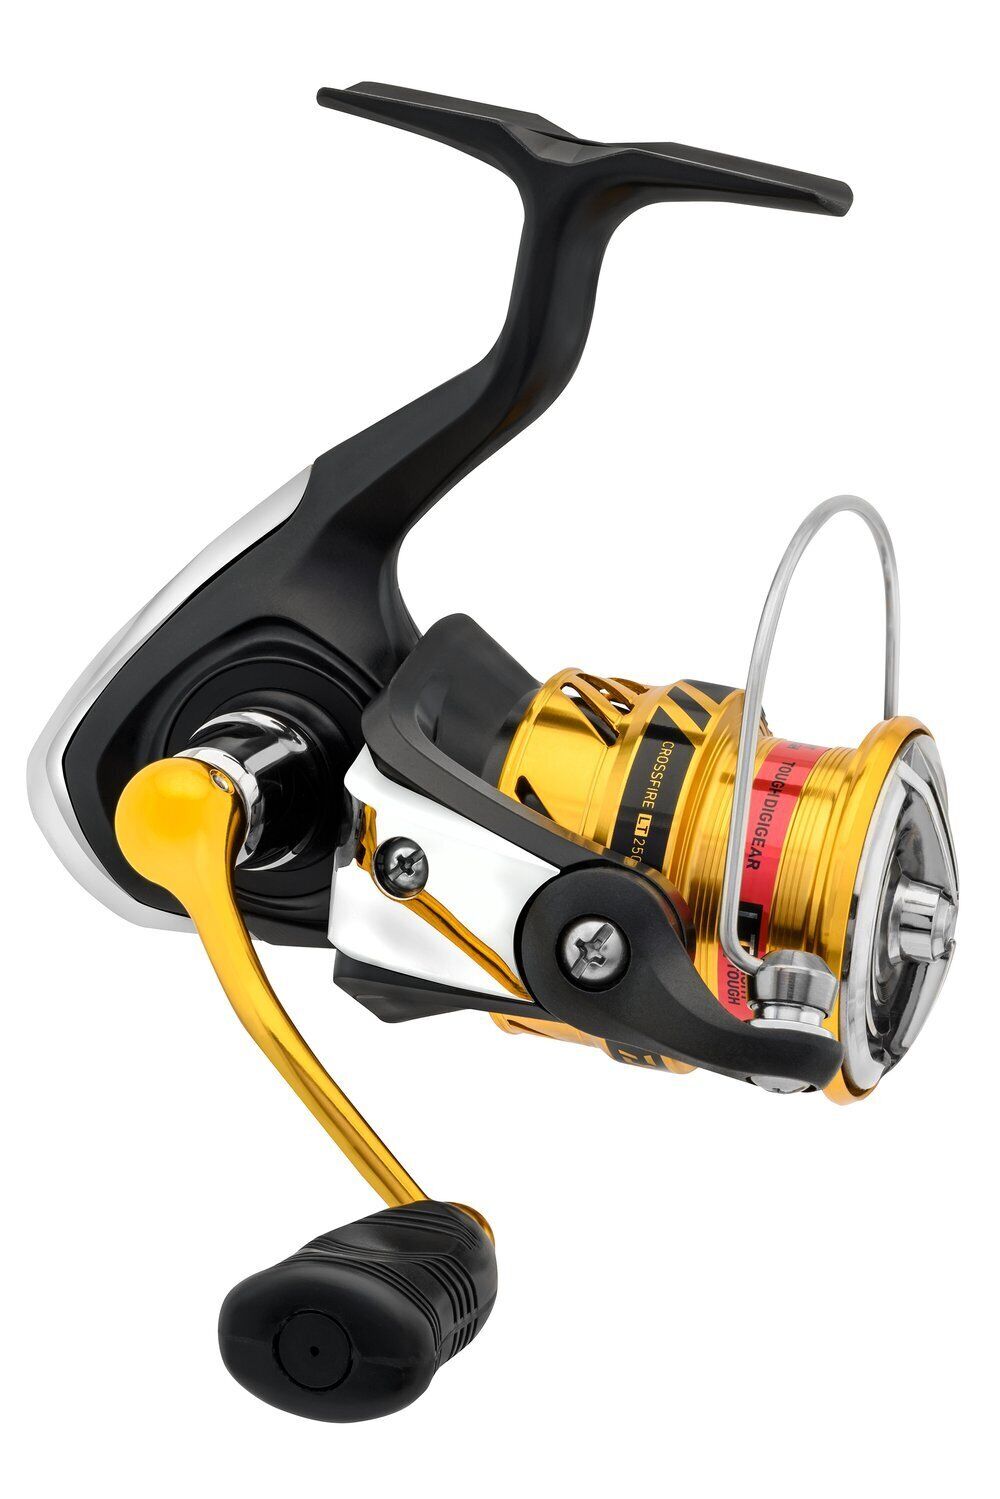 Daiwa Crossfire LT Spin Reel - 2000 - Mansfield Hunting & Fishing - Products to prepare for Corona Virus